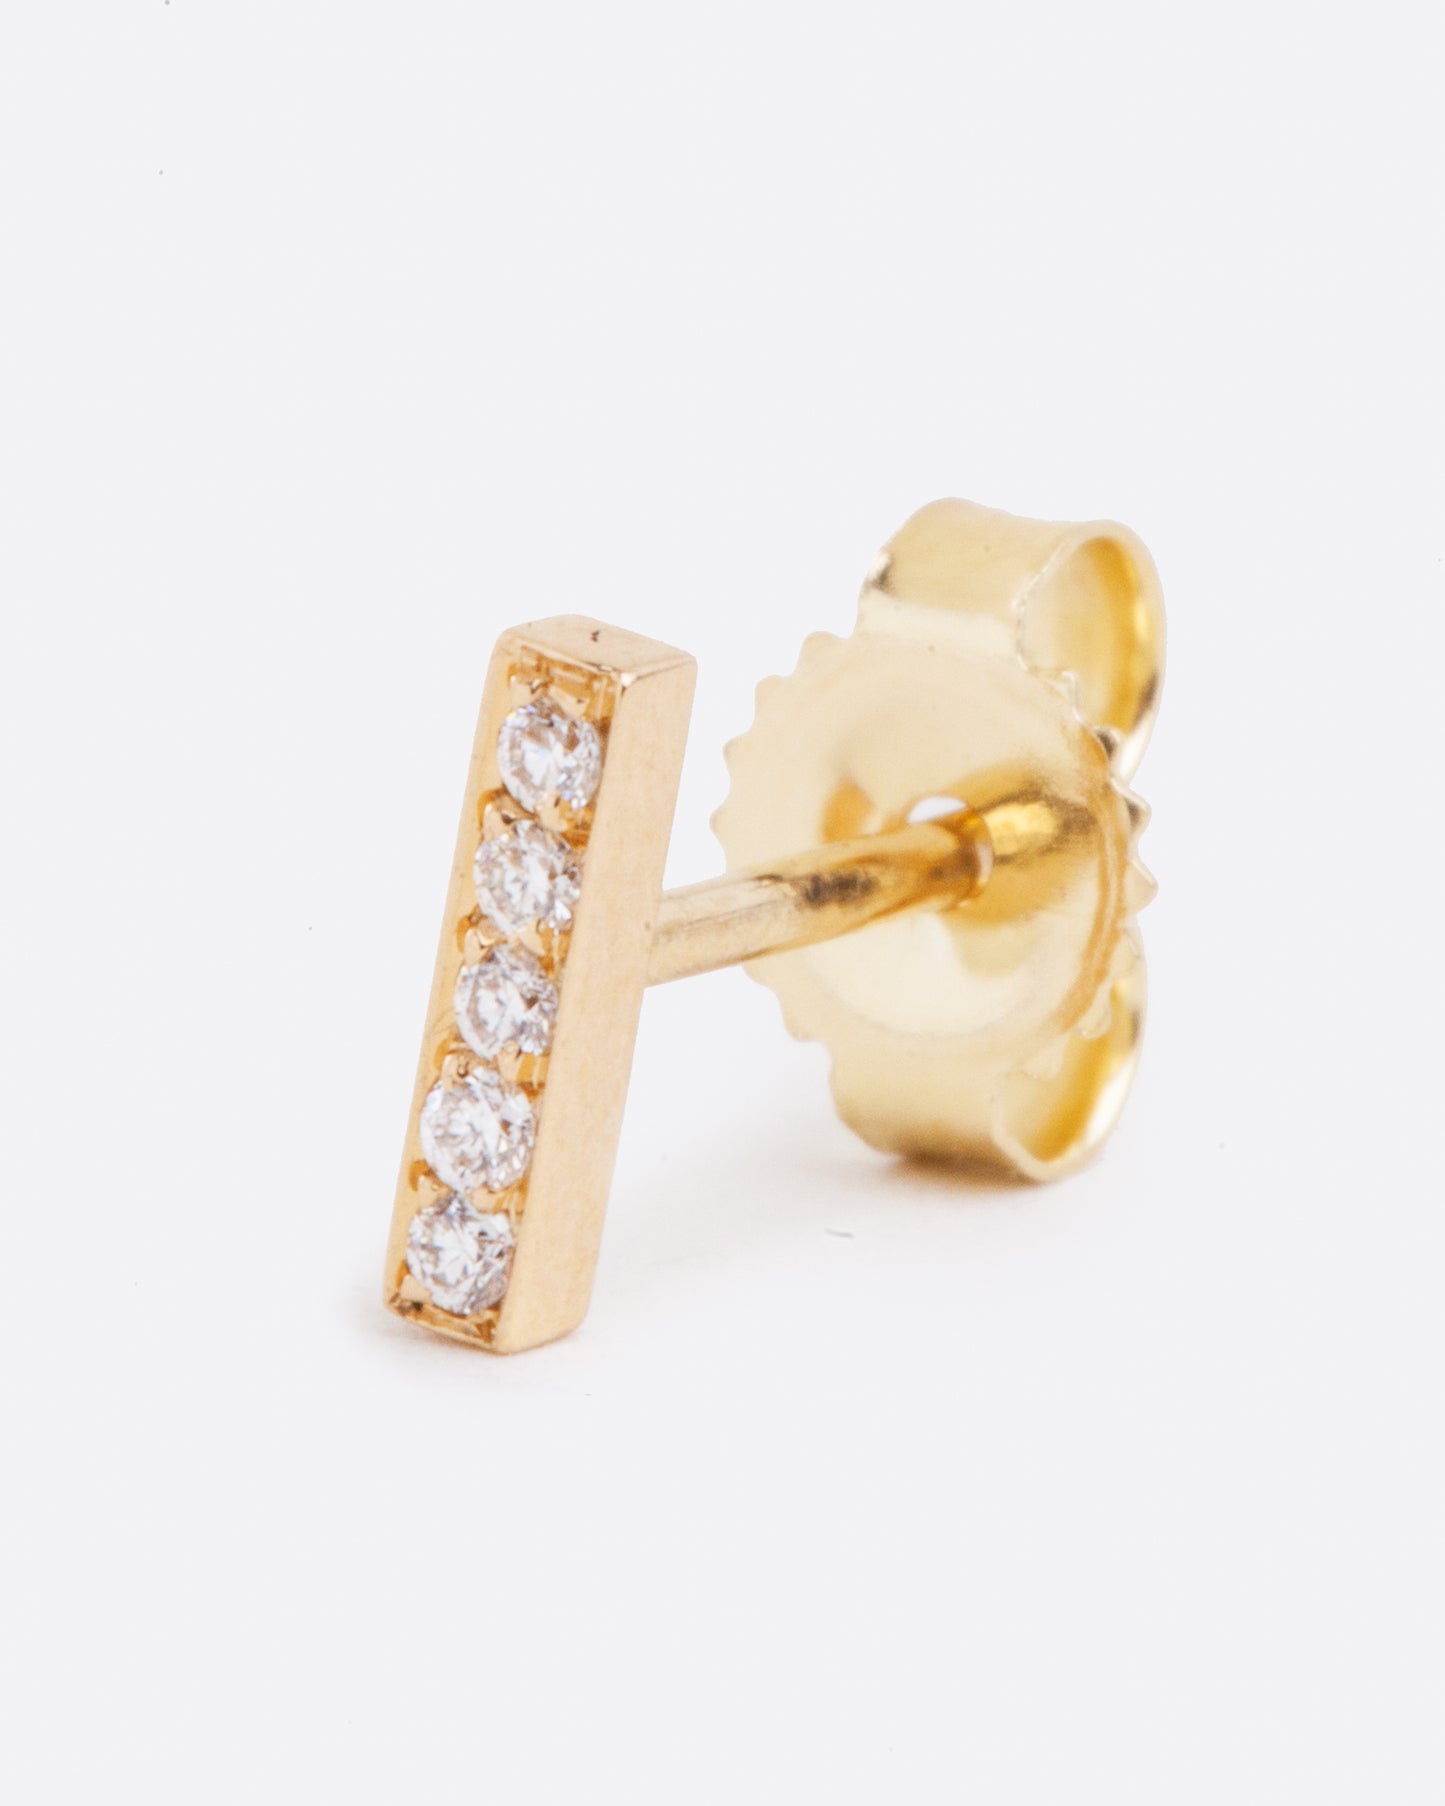 14k yellow gold bar stud earring with five white diamonds by Selin Kent, shown from the front.